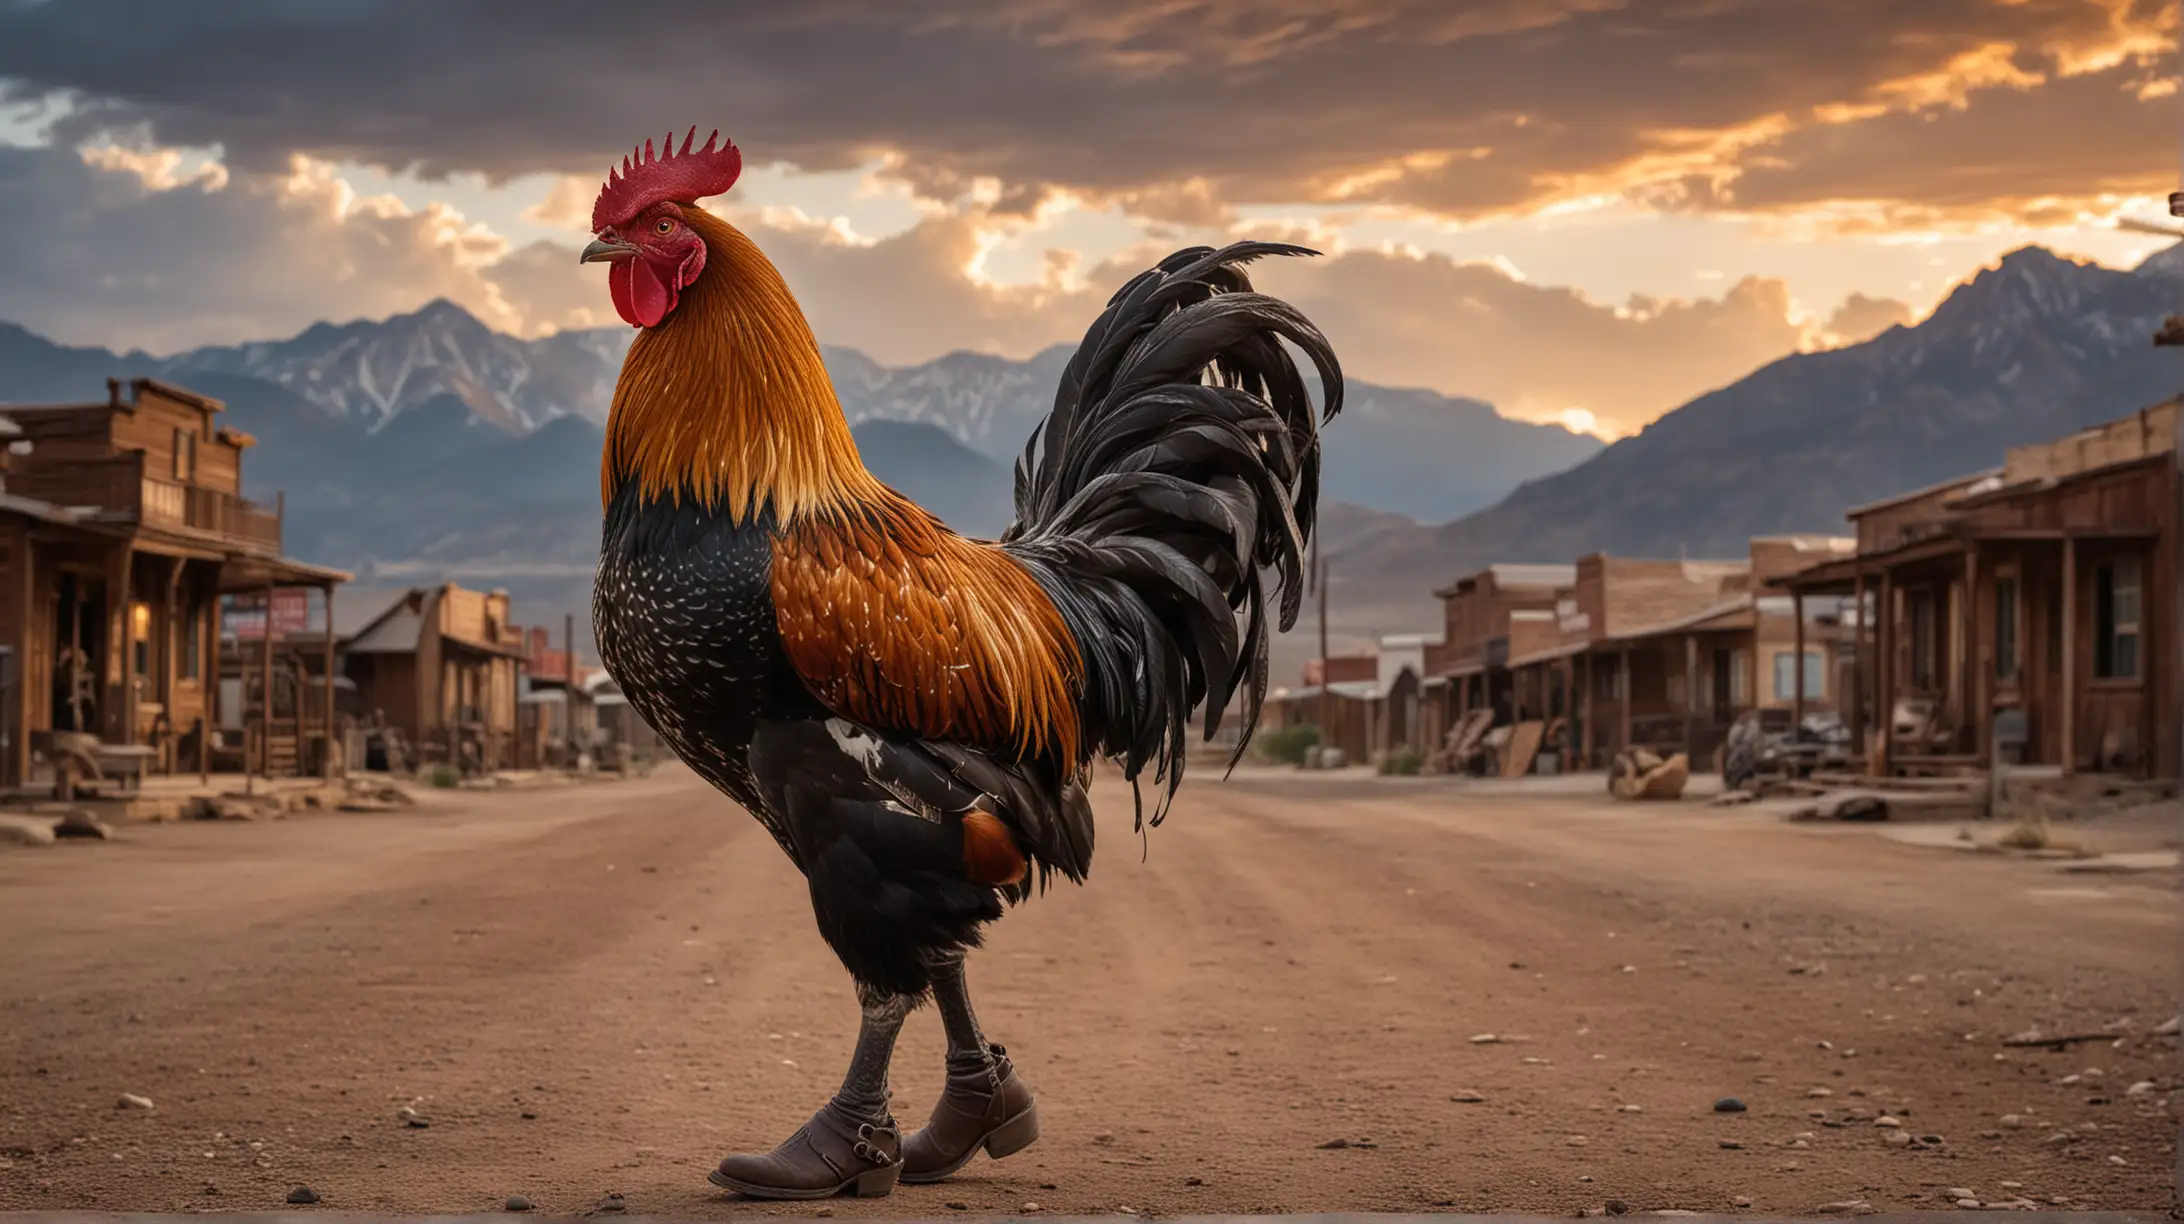 A rooster is in the street of an old west town, he wears cowboy boots and has a pistol strapped around his waist, there are mountains, warm light and a dramatic sky.